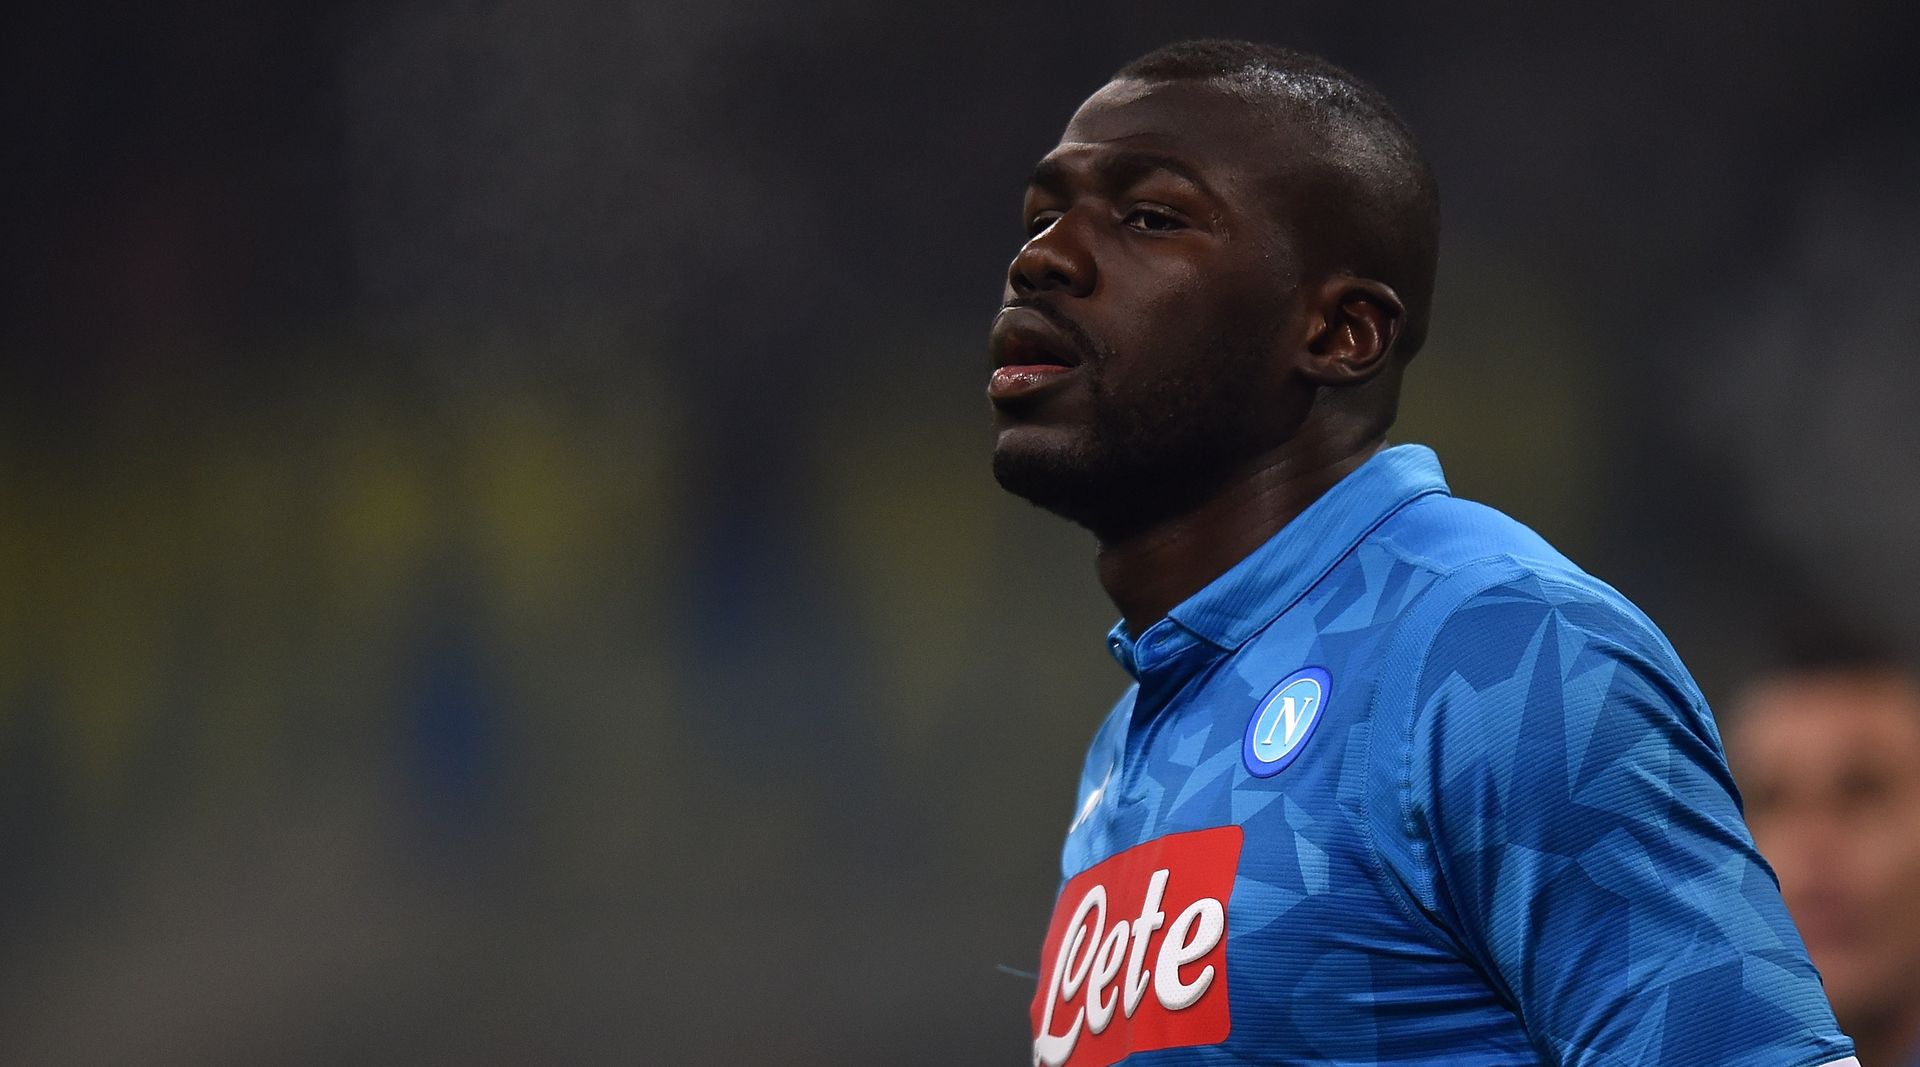 <p>                     Perhaps the greatest African player ever to ply his trade in Serie A, Senegal superstar Kalidou Koulibaly joined Napoli from Belgium’s Genk in 2014.                   </p>                                      <p>                     He soon established himself as one of the most formidable centre-halves around, featuring in four Serie A Teams of the Year and being named the league’s standout defender of 2018/19.                   </p>